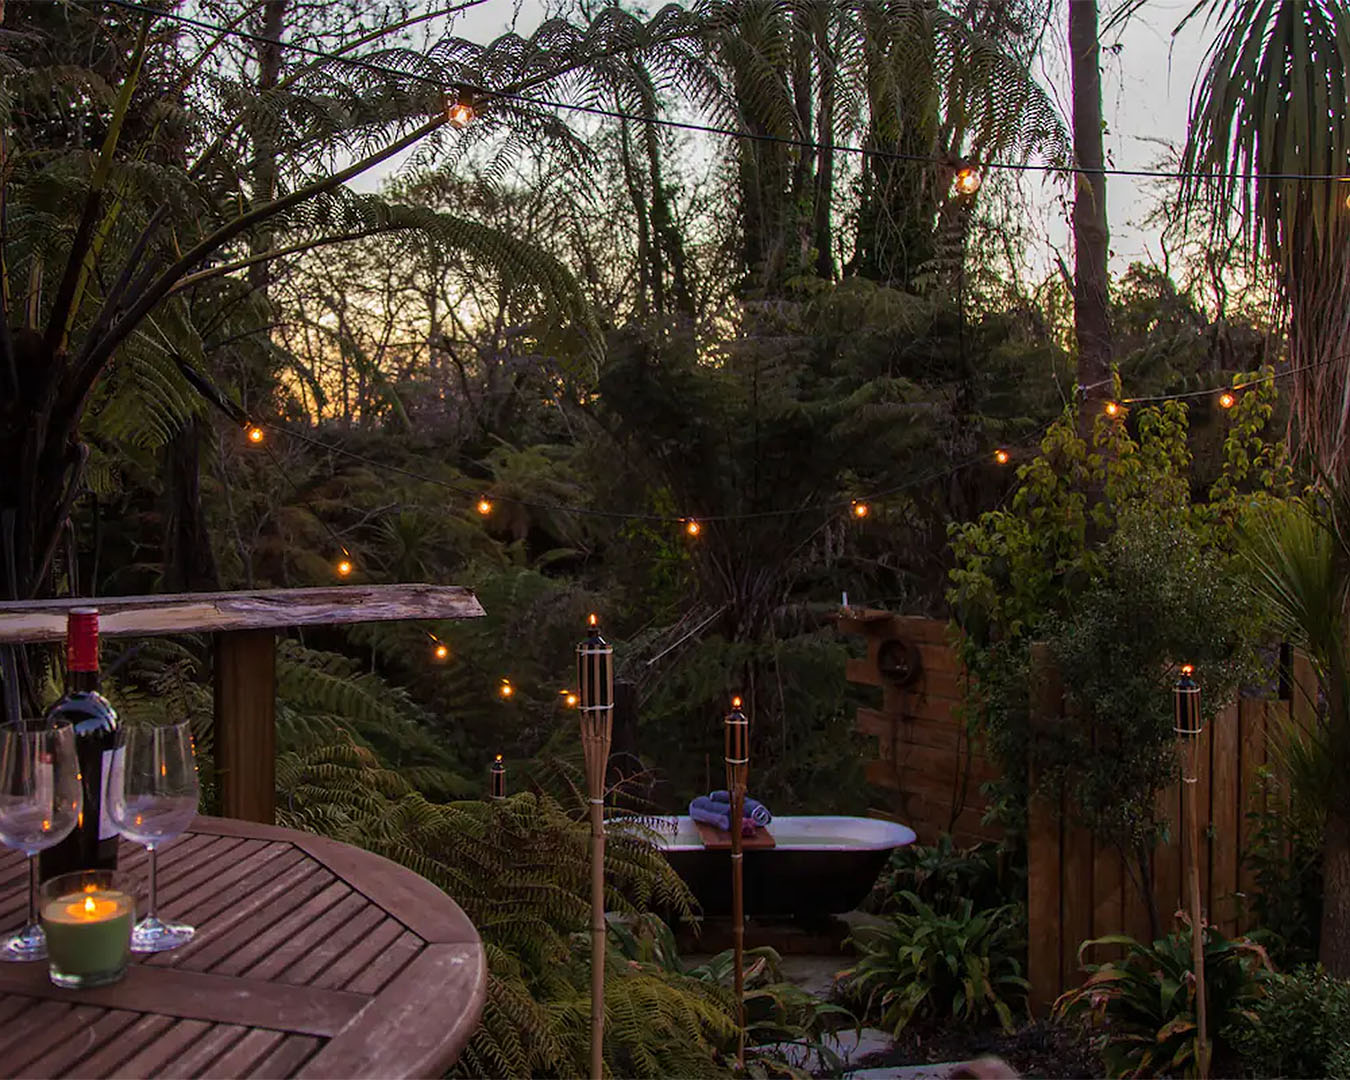 A stunning garden lit by fairy lights and tiki torches in the garden, with an outdoor bath with running hot water. No wonder this is one of the best Airbnbs in NZ with an outdoor bath.